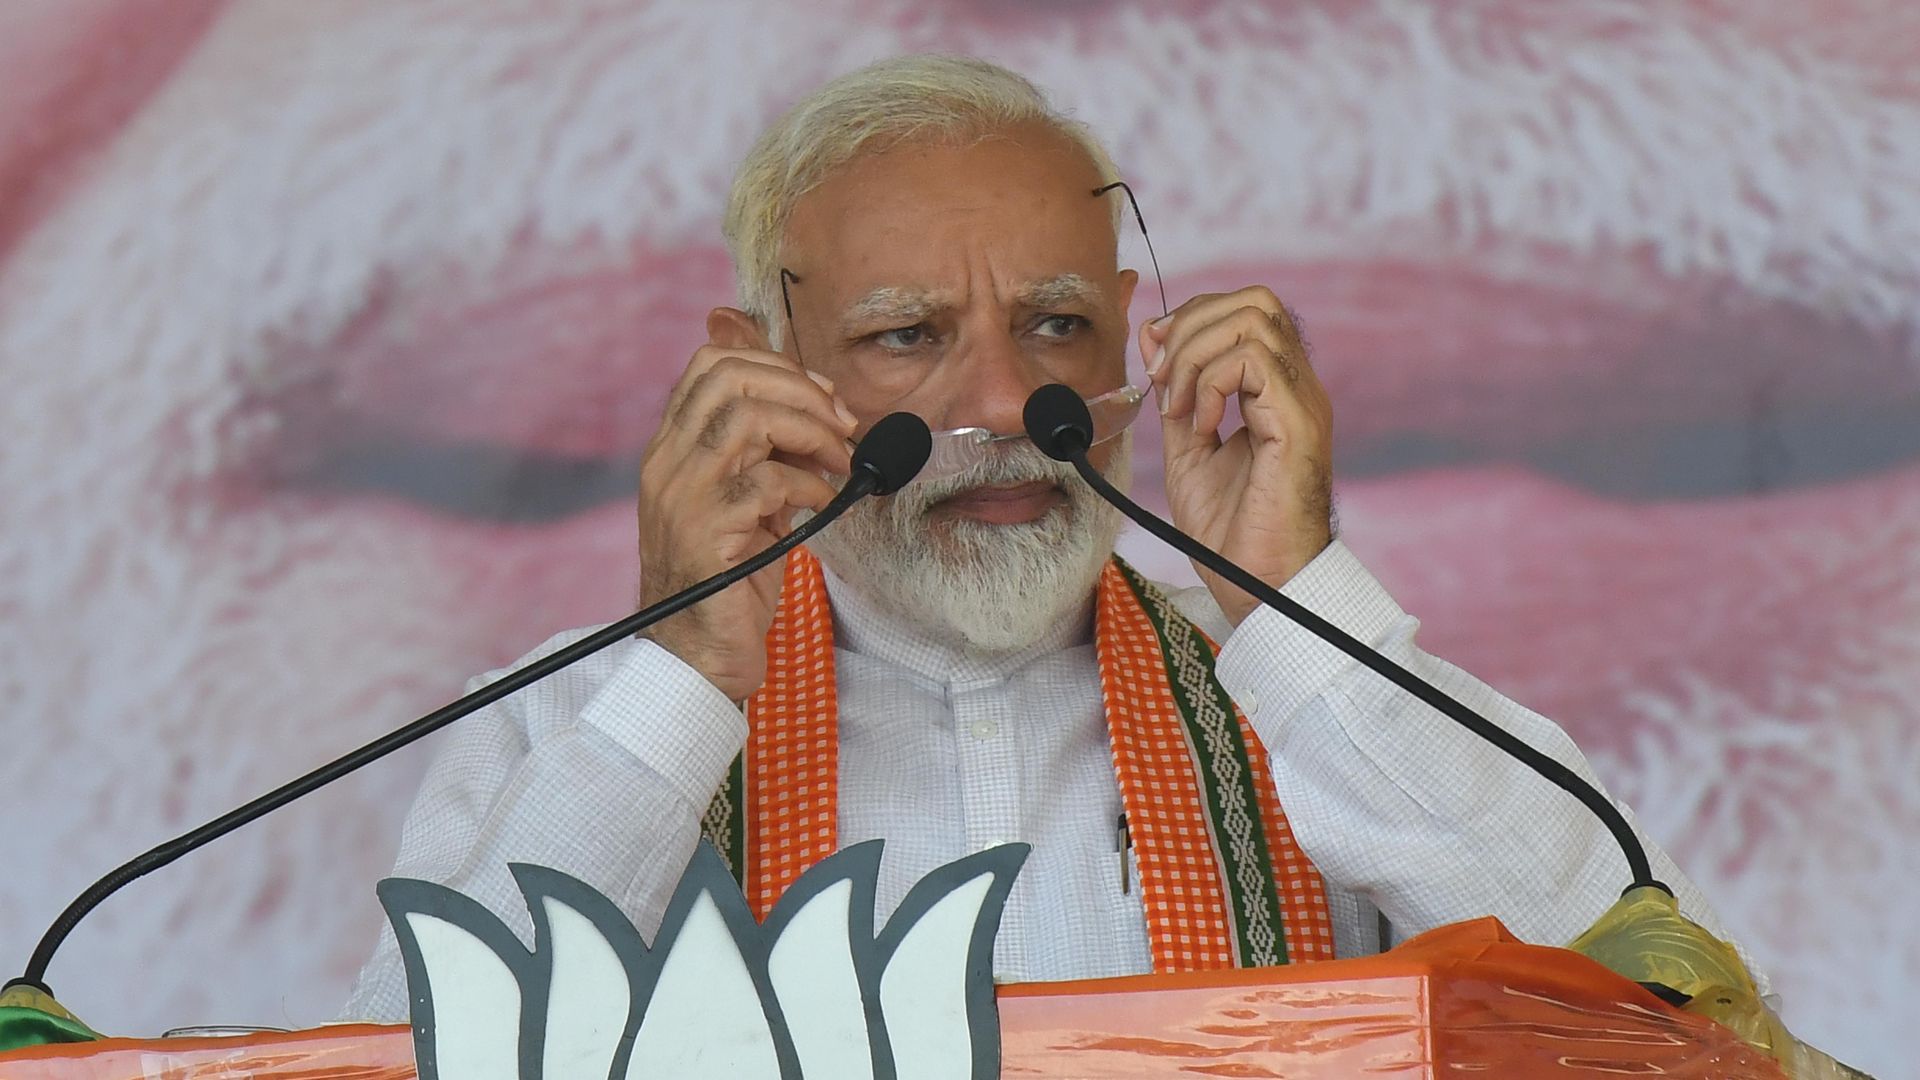 Prime Minister Narendra Modi gestures while addressing his supporters during an election campaign rally ahead of the national elections in CHANDITALA, HOOGHLY, WEST BENGAL on April 29